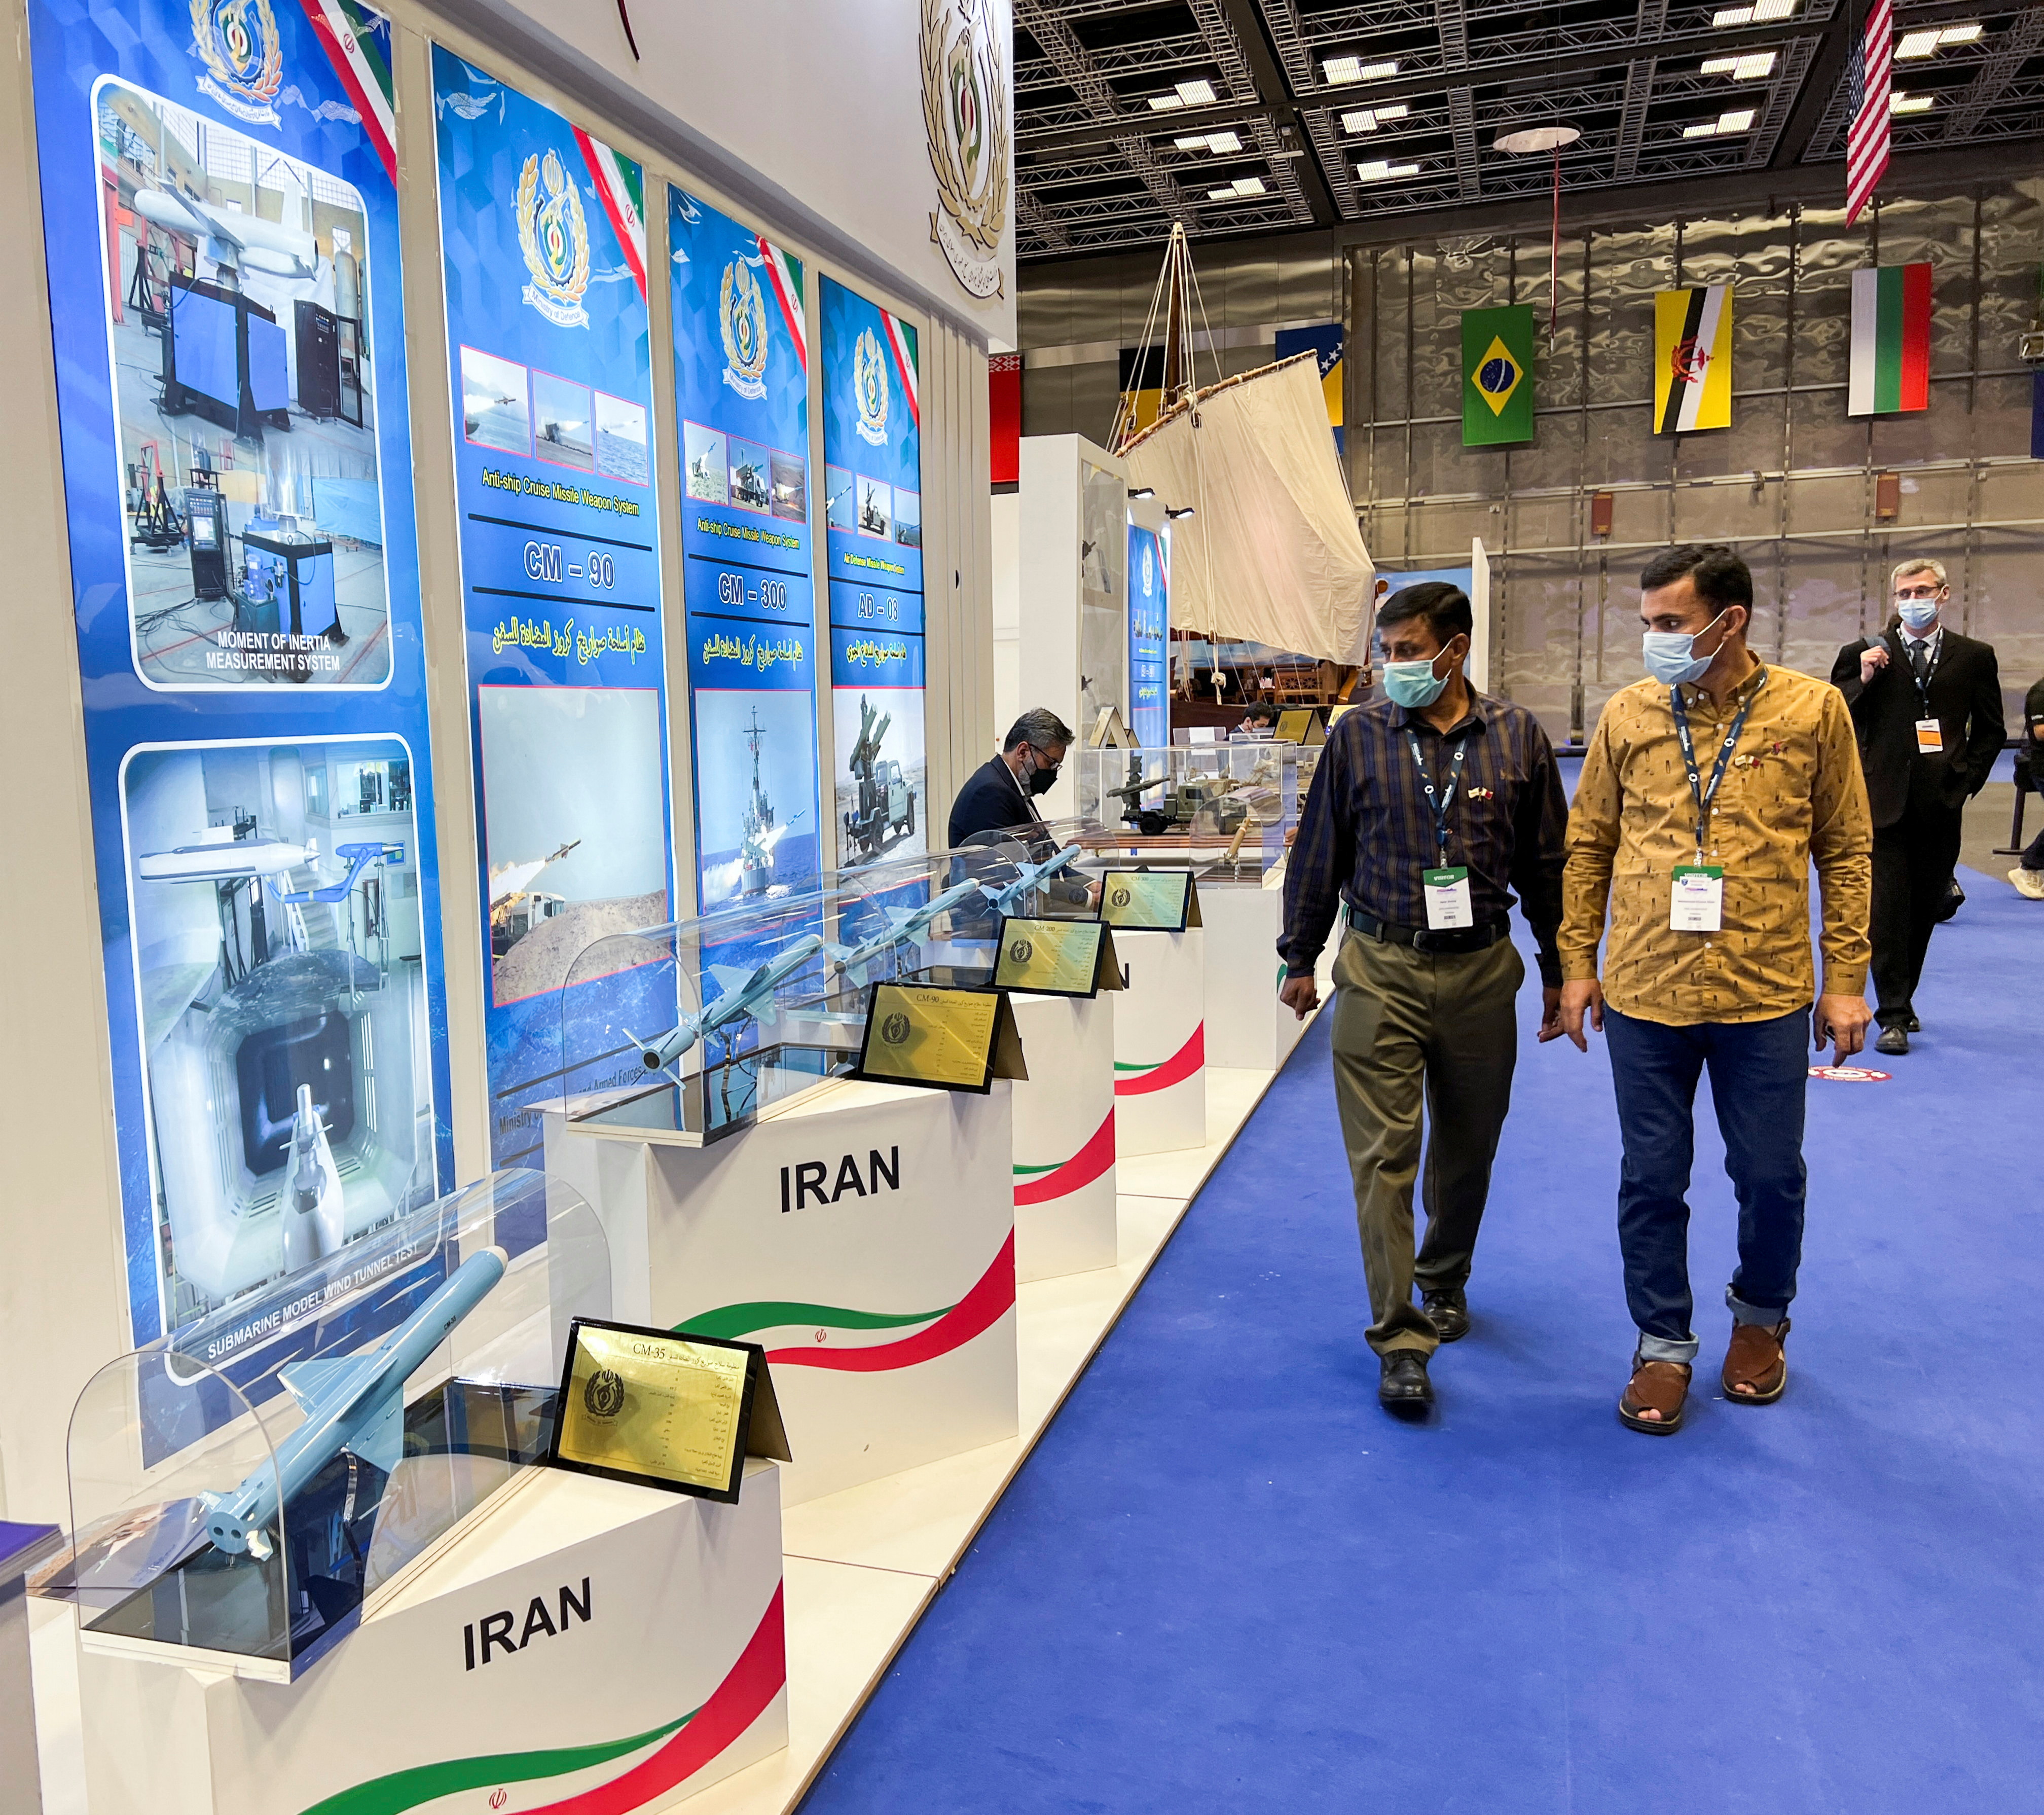 Visitors look at Anti-ship Cruise Missile Weapon System models at the IRGC booth at the Doha International Maritime Defense Exhibition and Conference (DIMDEX) in Doha